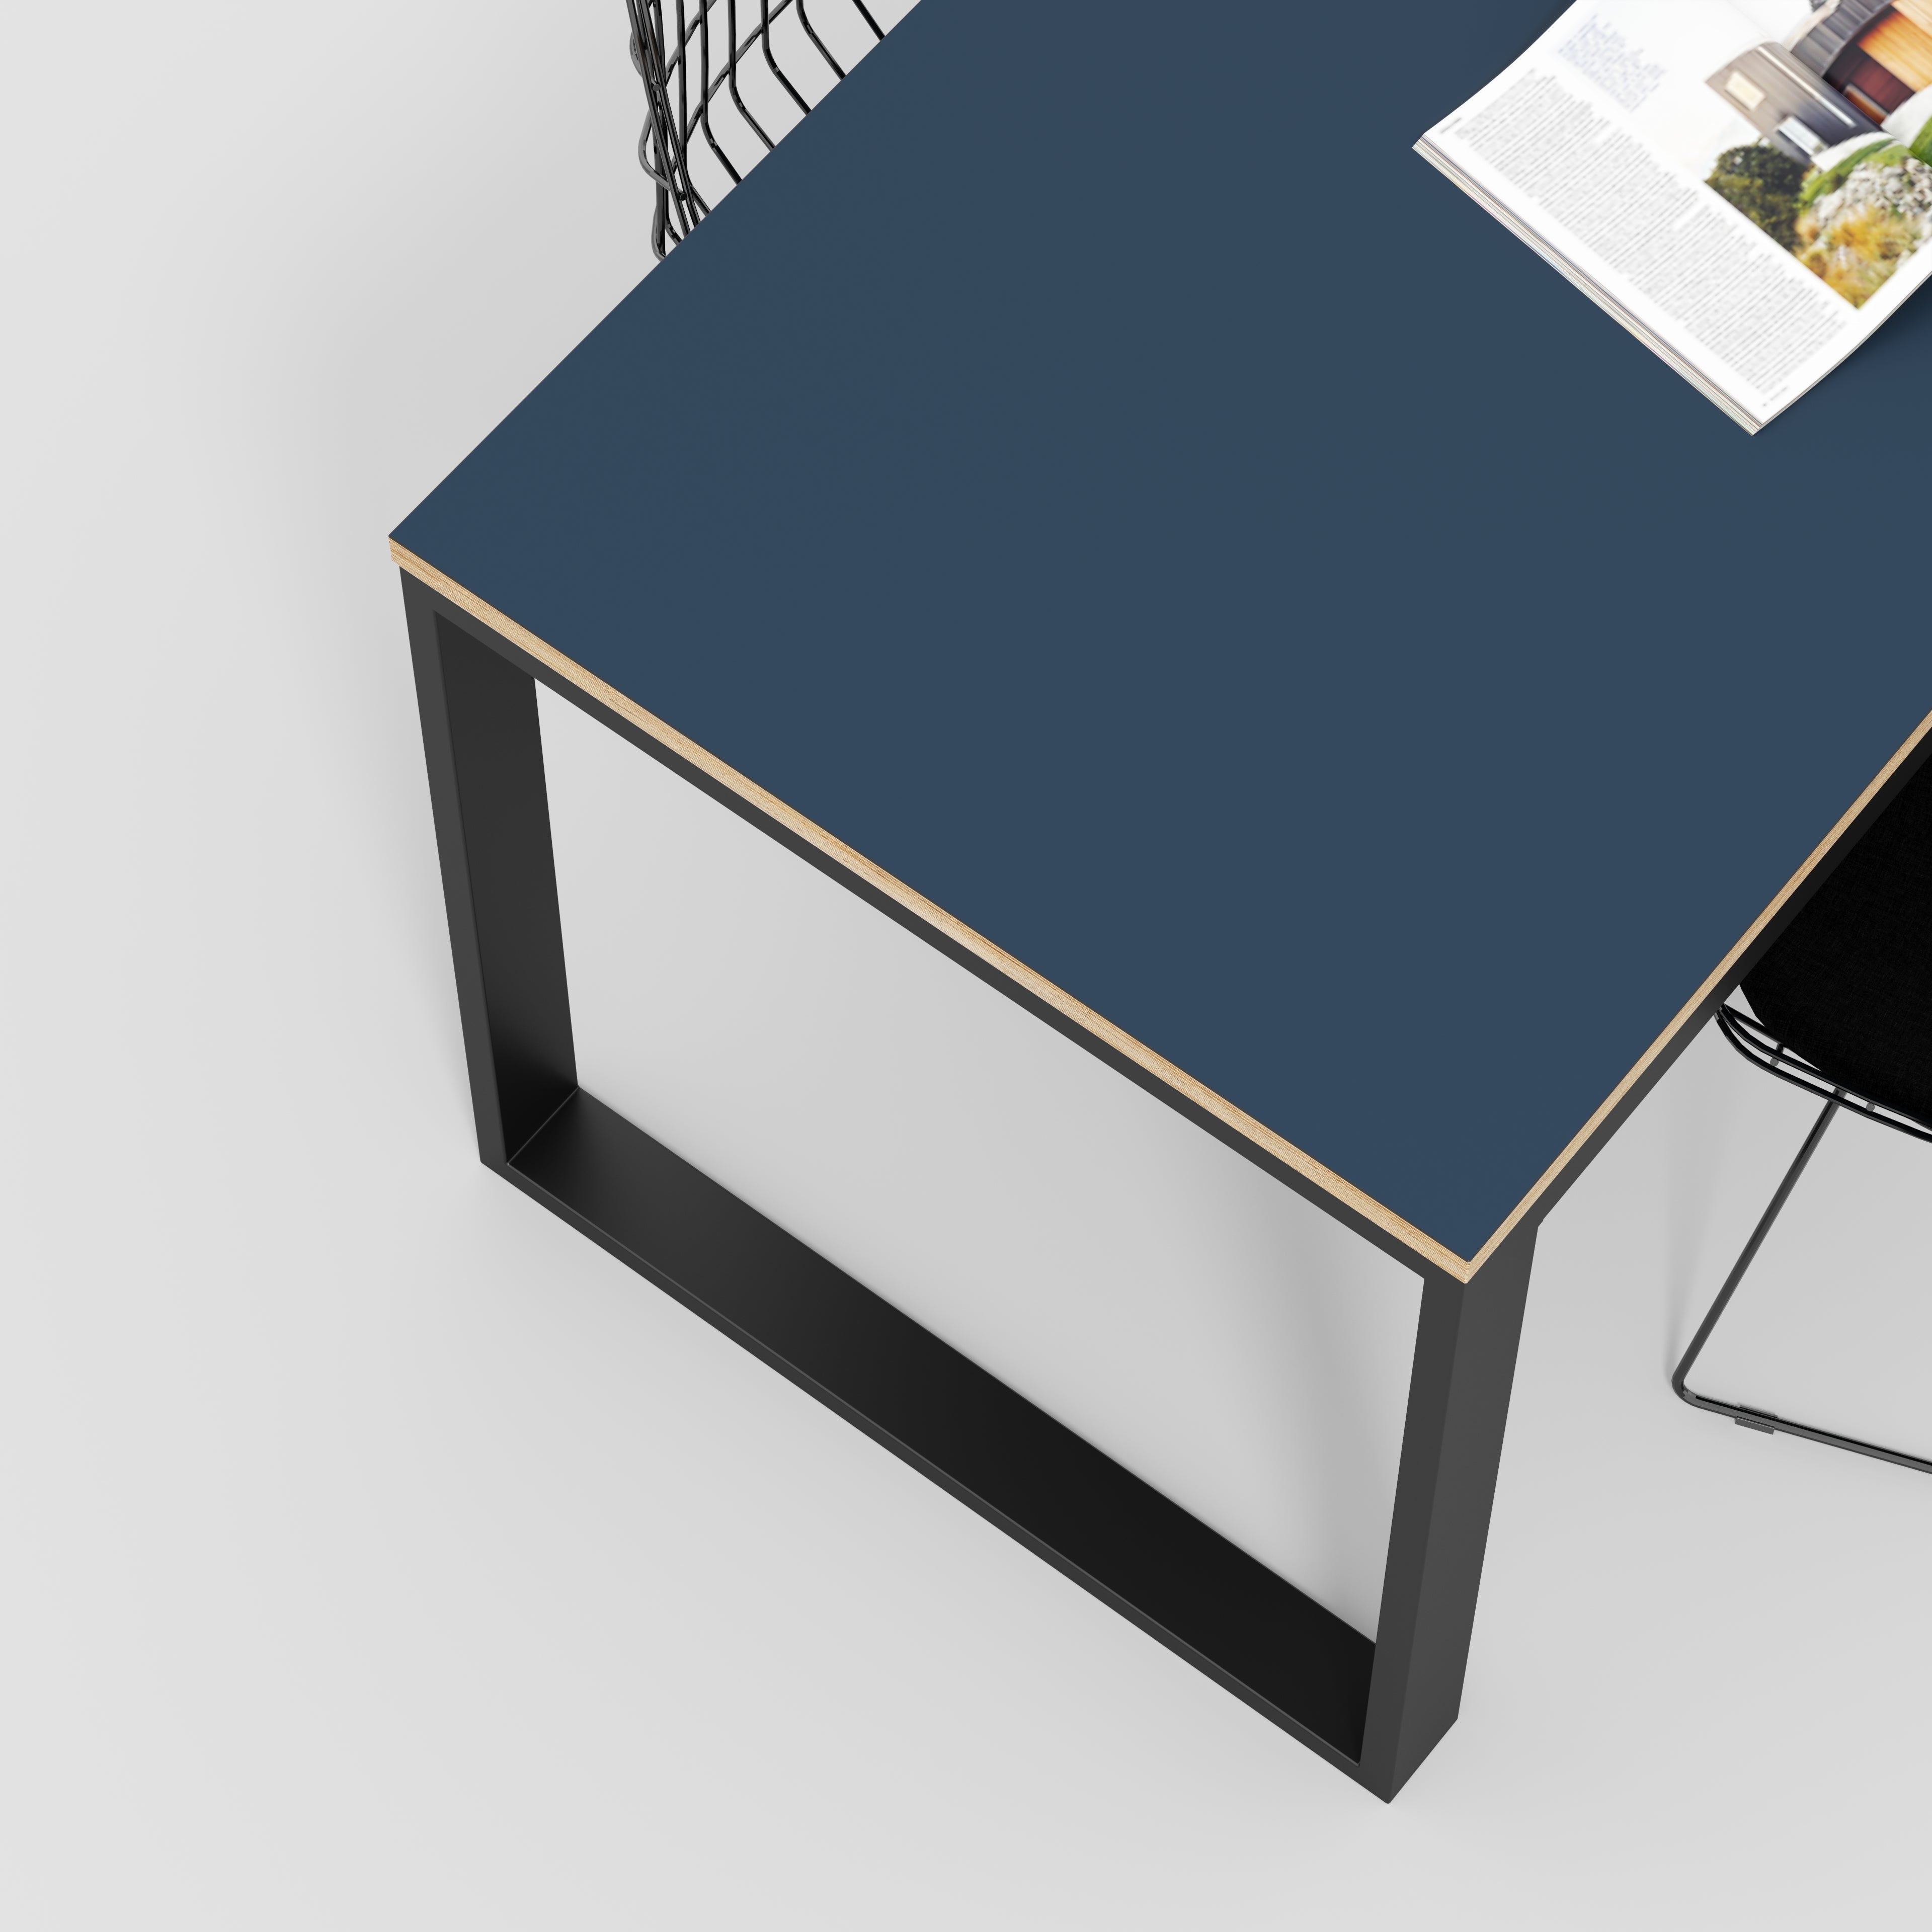 Table with Black Industrial Frame - Formica Night Sea Blue- 2400(w) x 745(d) x 735(h)